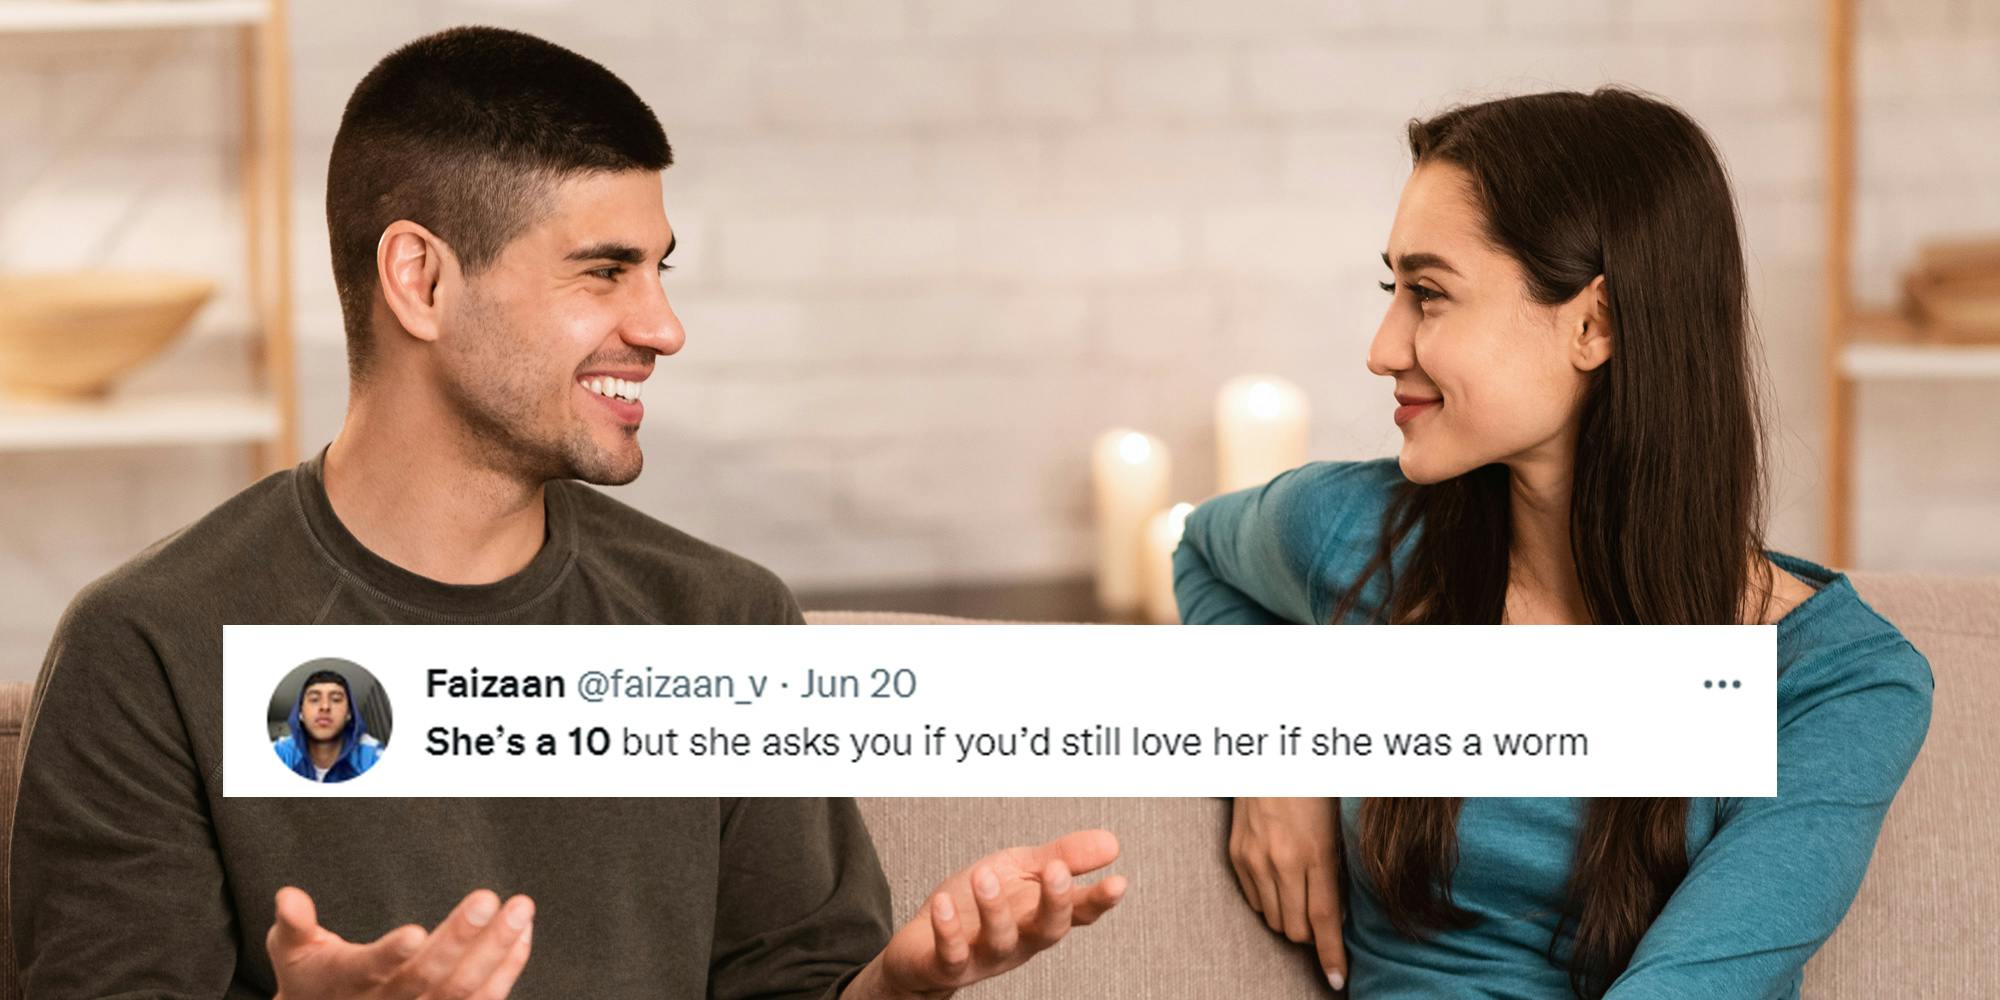 couple sitting on couch man laughing hands out woman smiling with tweet by Faizaan centered caption "She's a 10 but she asks if you'd still love her if she was a worm"